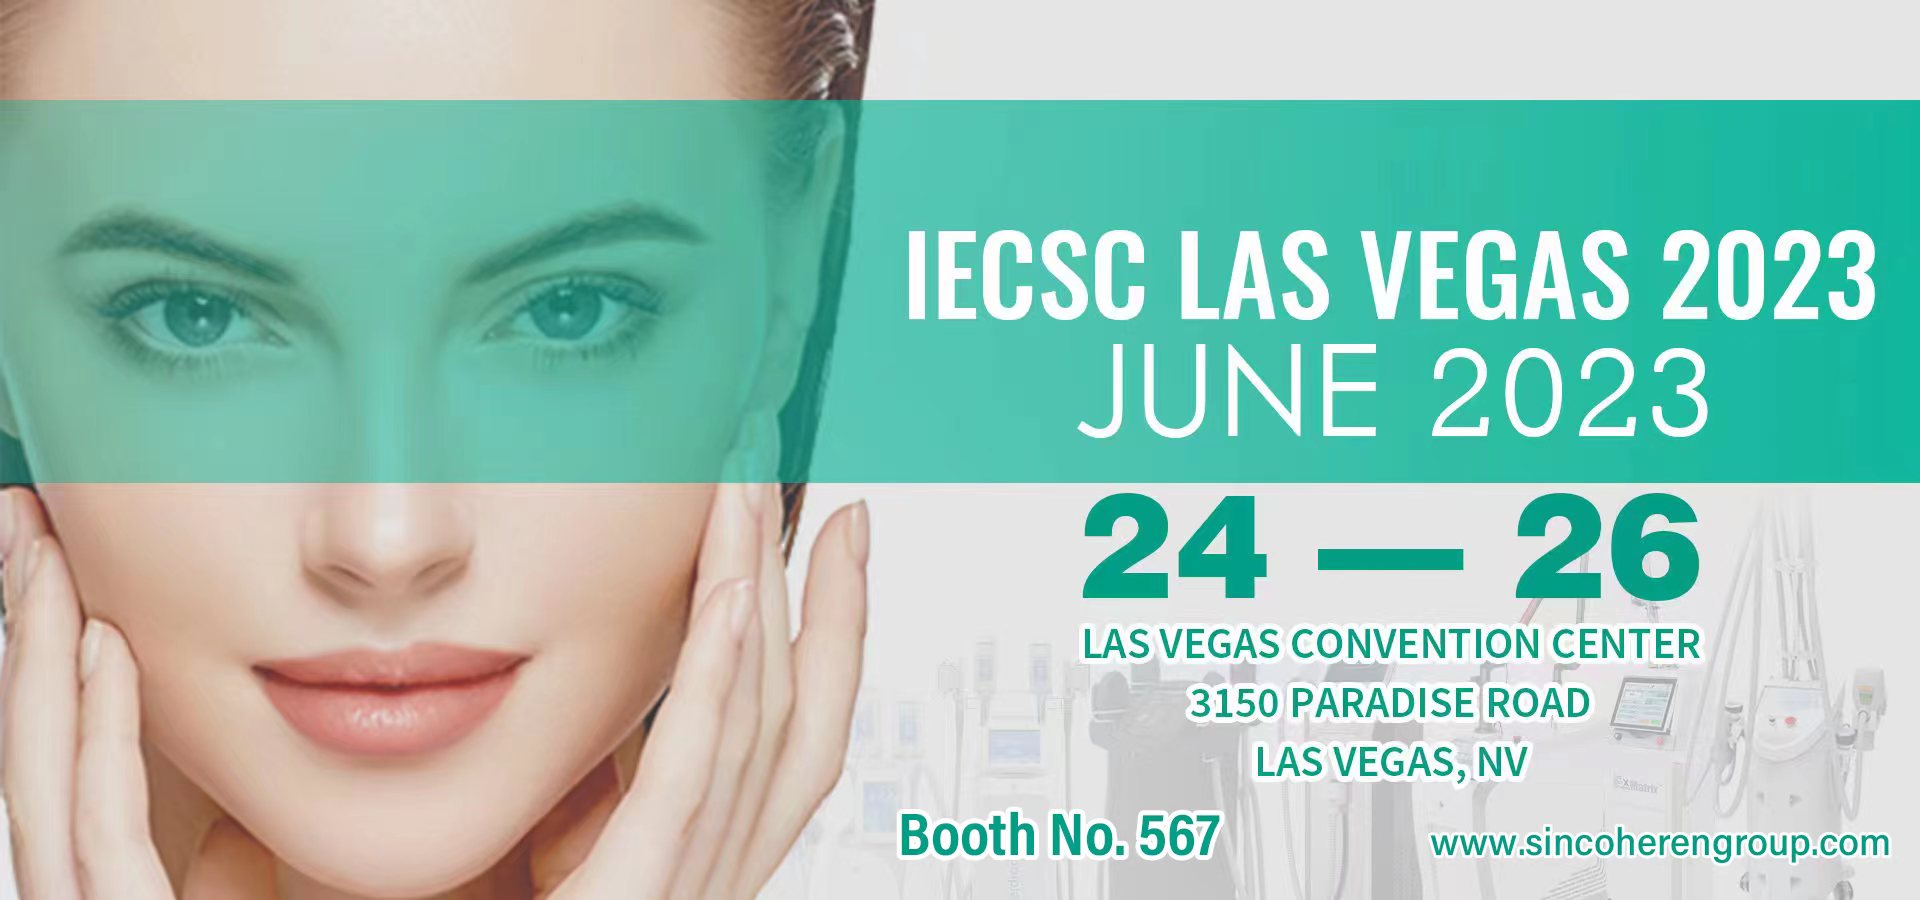 Sincoheren invite you to attend the beauty exhibition of IECSC Las Vegas